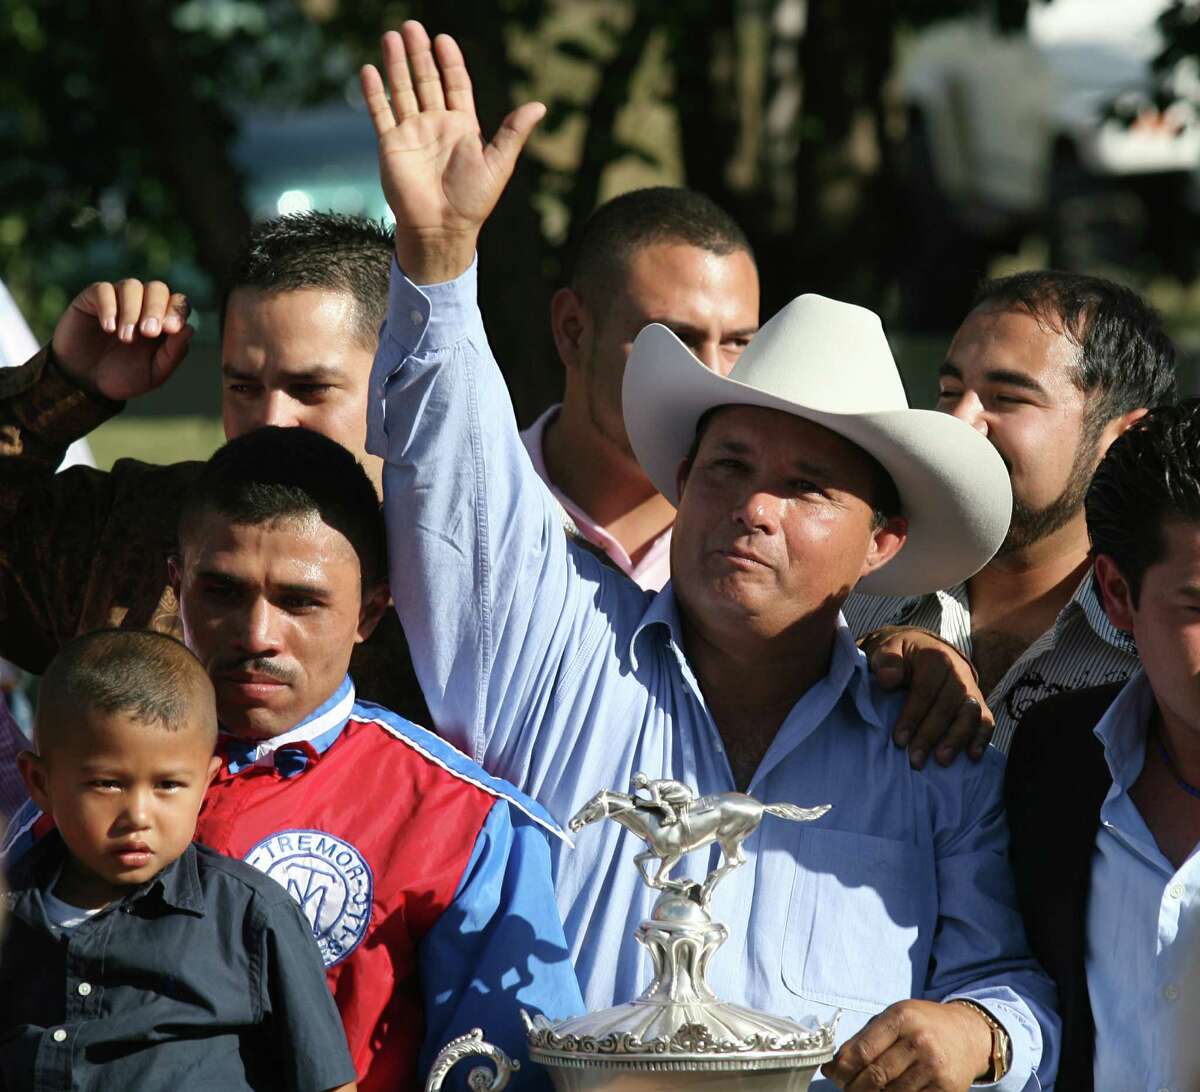 In this photo taken Sept. 6, 2010, owner Jose Trevino Morales, center, acknowledges the crowd as he stood with the trophy after Mr. Piloto won the All American Futurity horse race at Ruidoso Downs, N.M. Federal agents raided a sprawling ranch in Oklahoma and the prominent quarter horse track in New Mexico on Tuesday, June 12, 2012, alleging the brother of a high-ranking official in a Mexican drug cartel used a horse-breeding operation to launder money. Seven of the 14 people indicted were arrested, including Jose Trevino Morales. (AP Photo/The El Paso Times, Rudy Gutierrez) EL DIARIO OUT; JUAREZ MEXICO OUT;